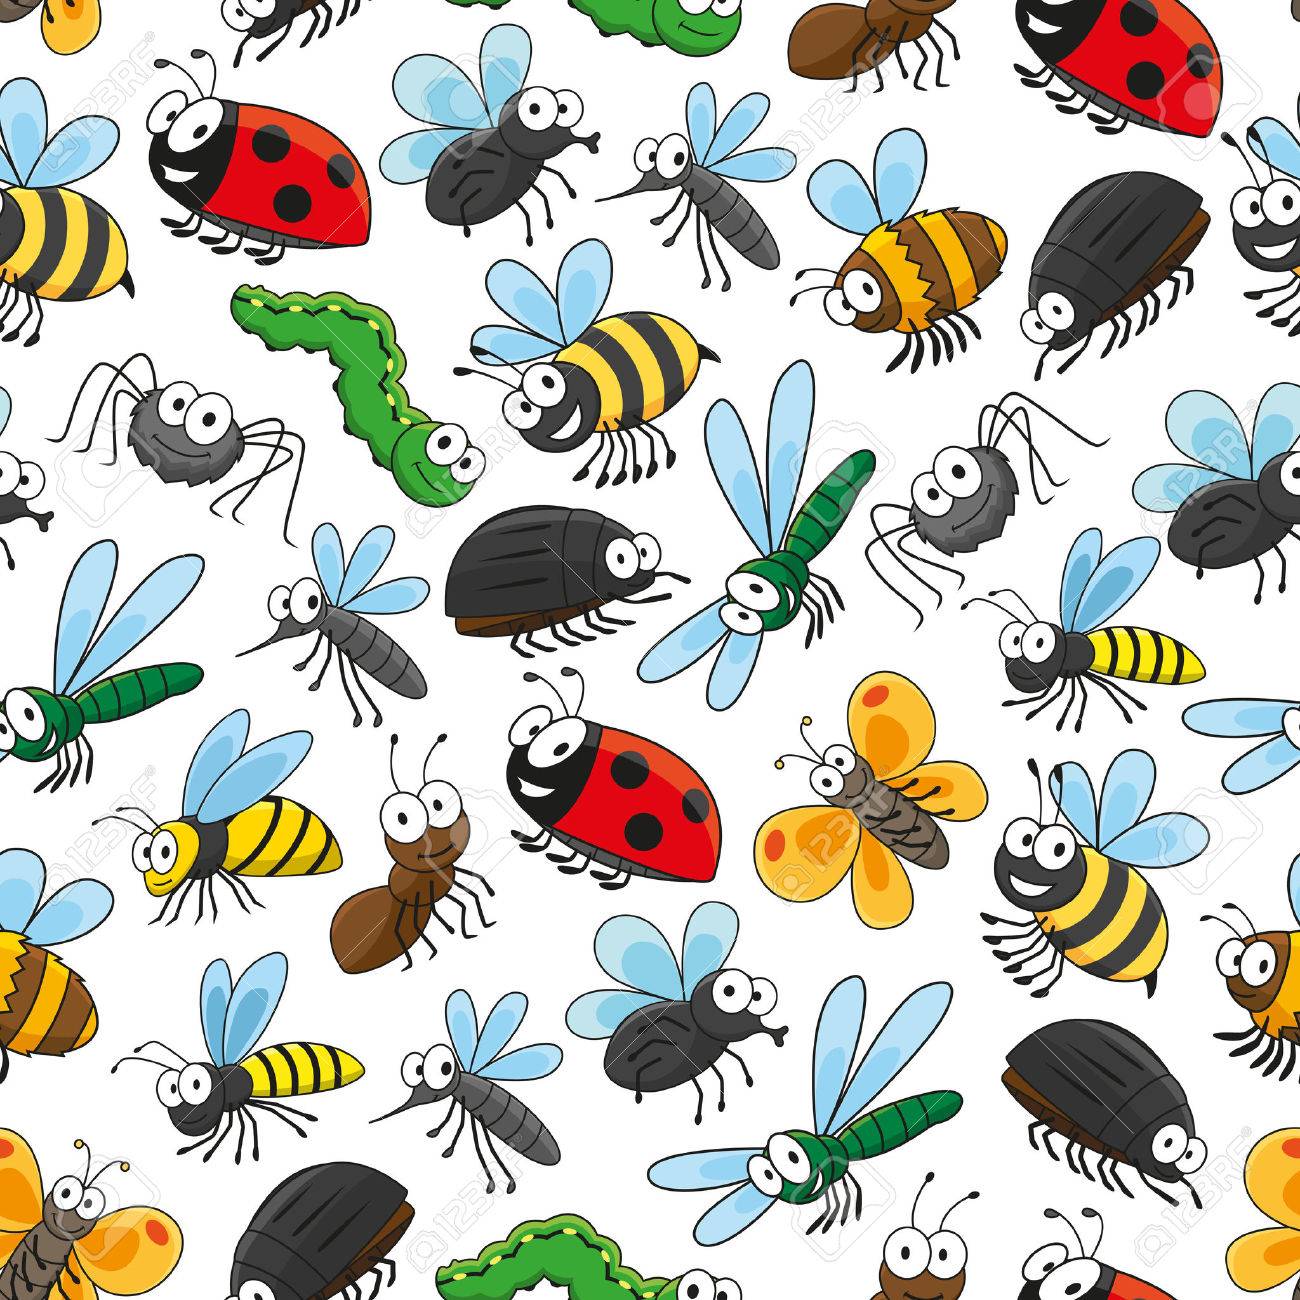 Bugs And Insects Funny Cartoon Seamless Wallpaper With Vector